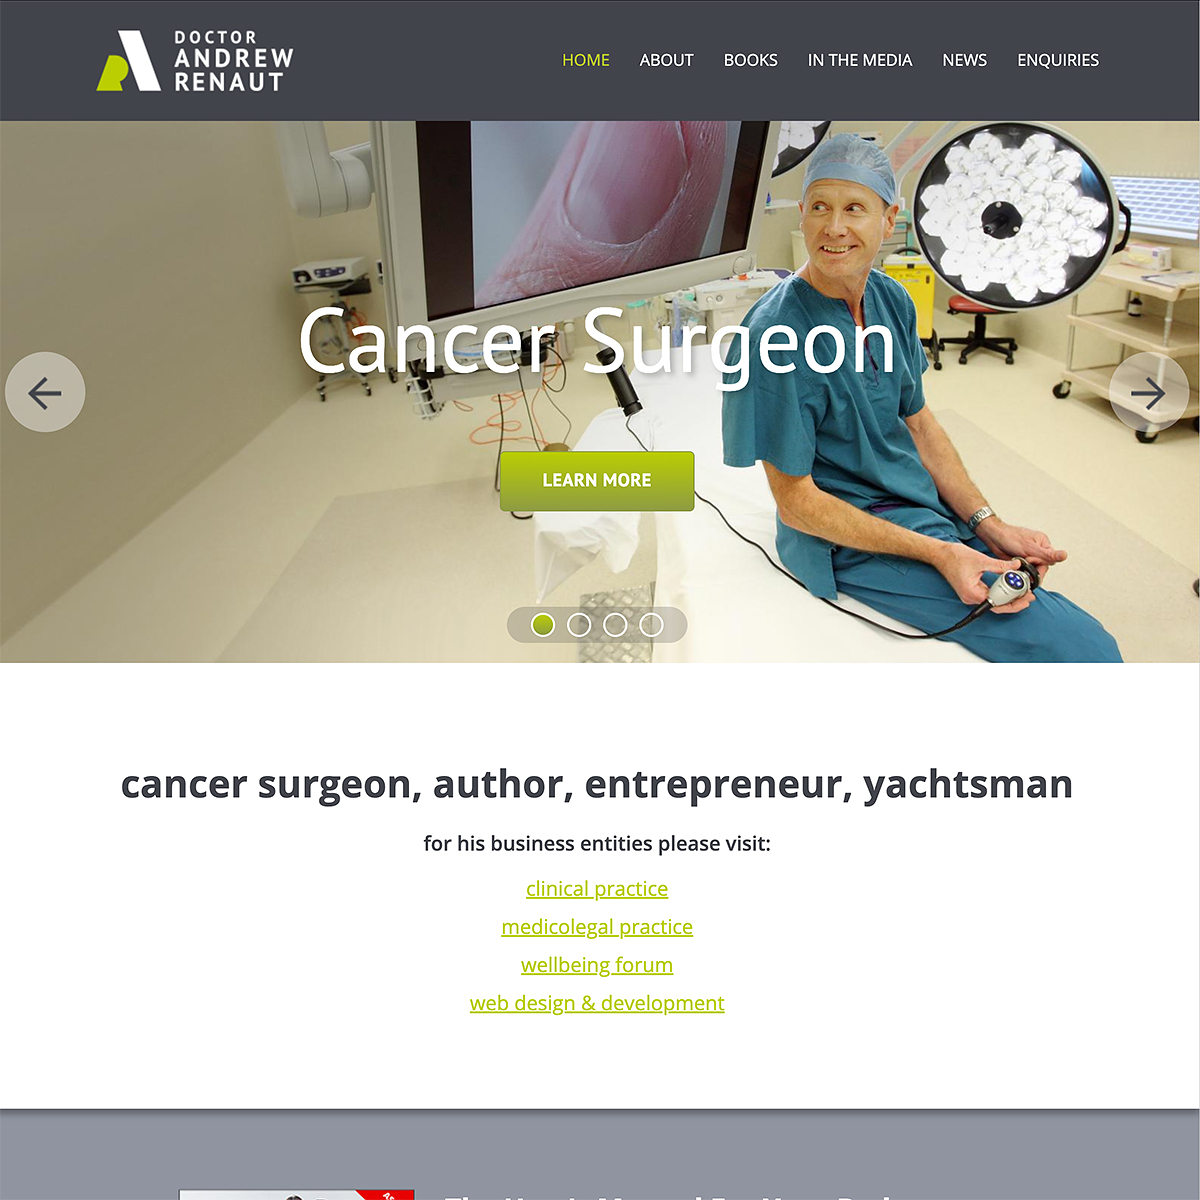 Dr Andrew Renaut - Homepage Banner - Cancer Surgeon